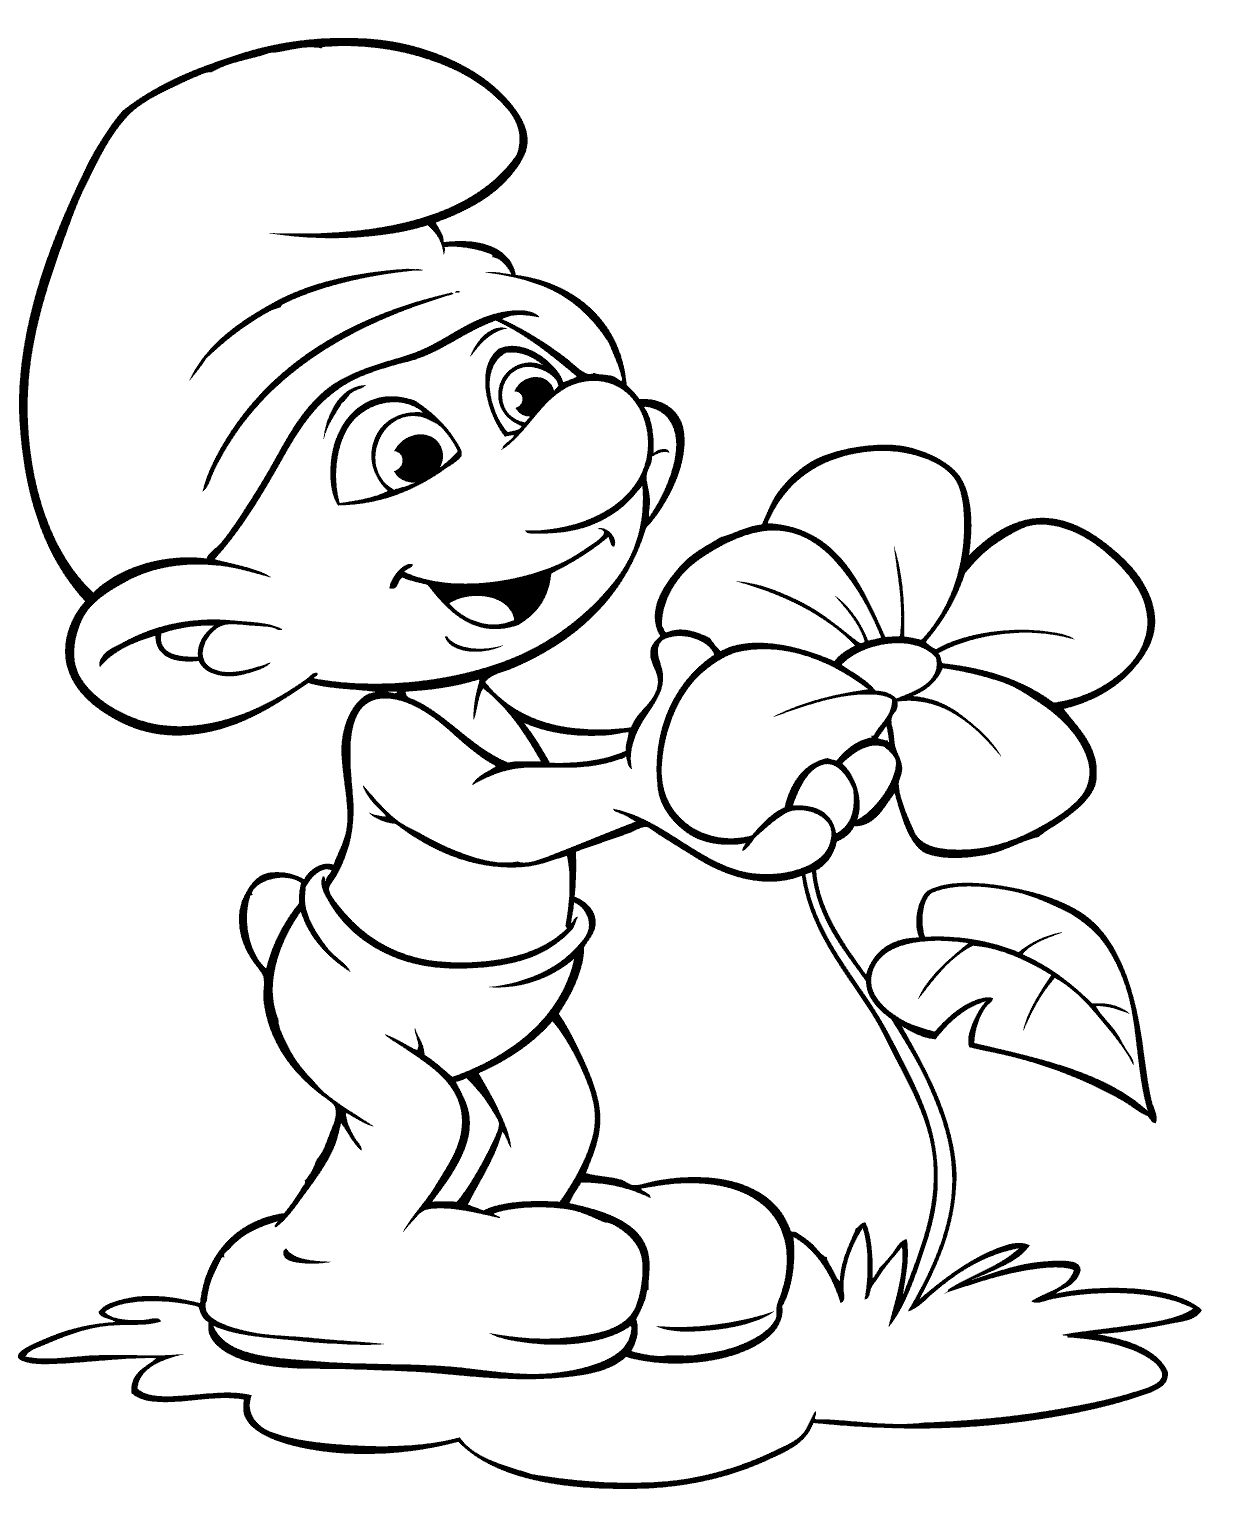 Smurf Coloring Pages From The Movie Smurfs 2 Coloring Pages Online